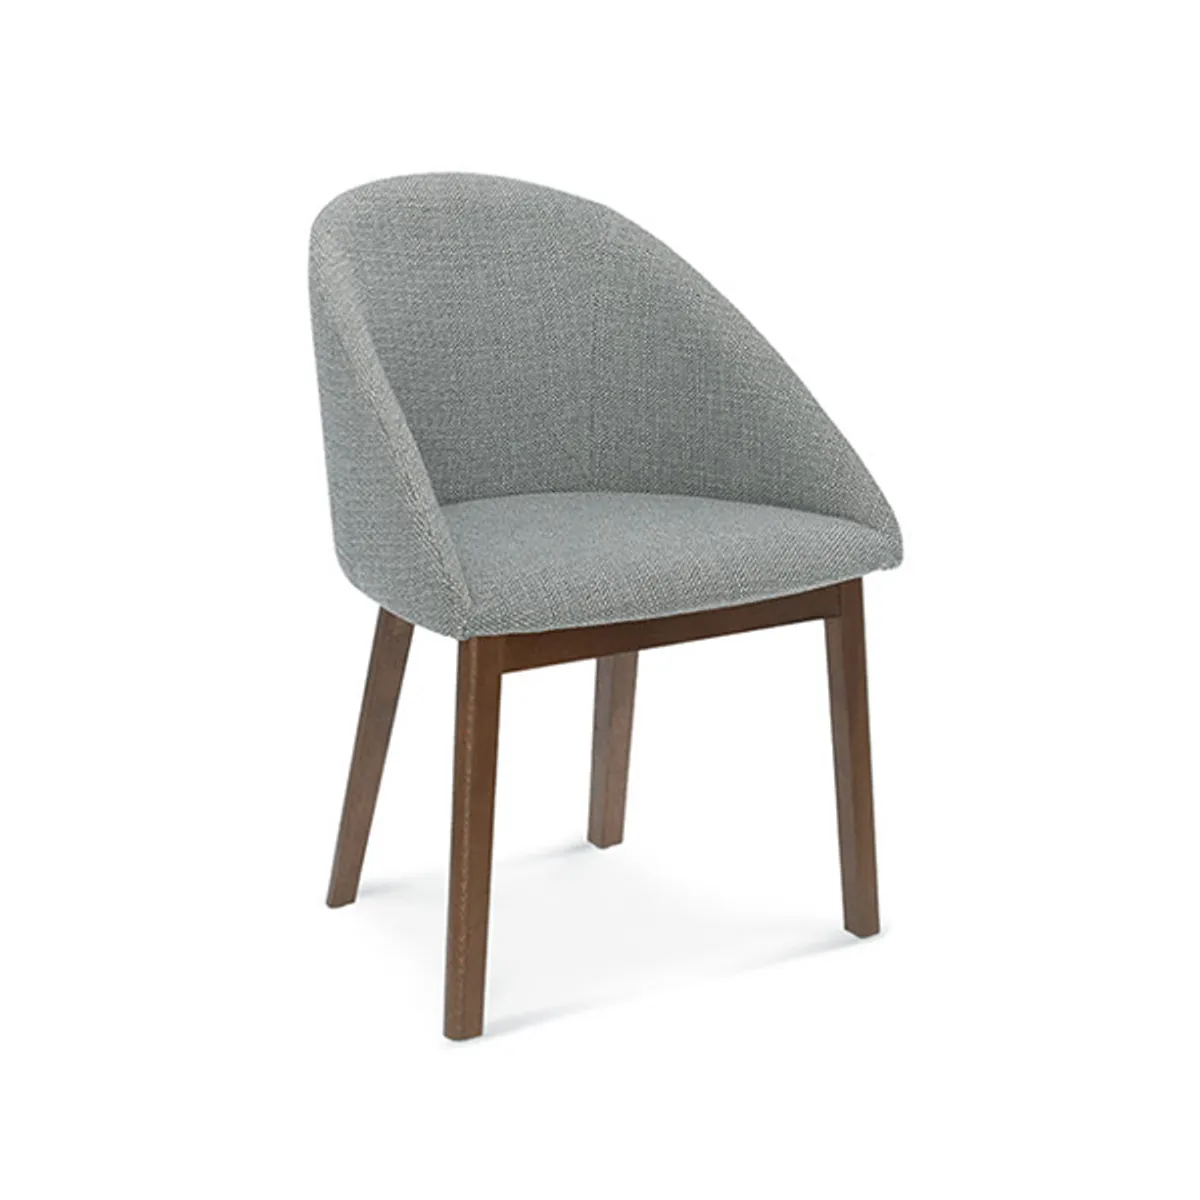 Luca Chair Upholstered For Commercial Use By Insideoutcontracts 022